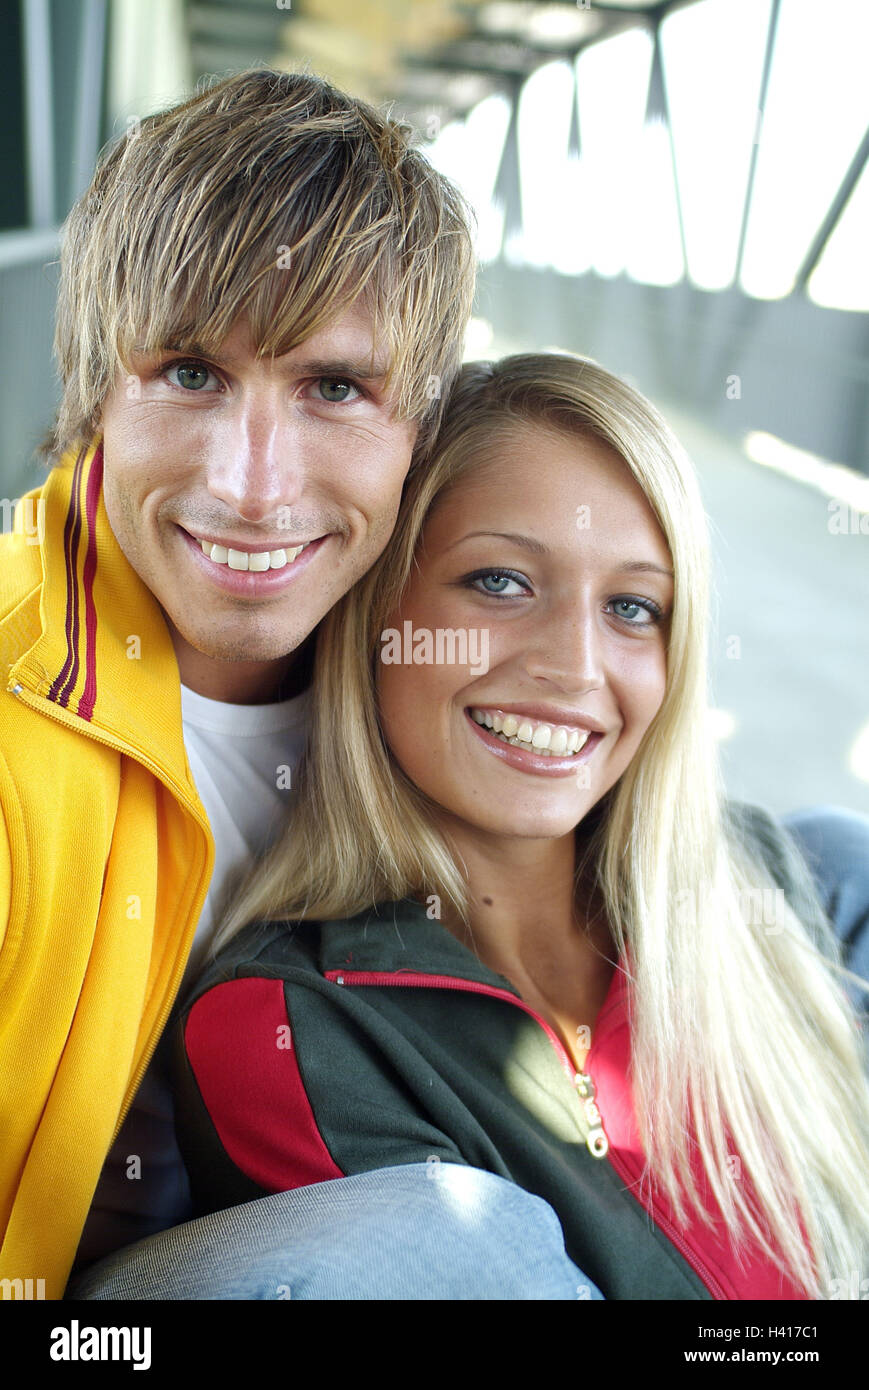 Couple, sit young, happy, together, half portrait, leisure time, friends, couples, blond, lean, respect, partnership, friendship, love, suture, touch, falls in love, happy, amuses, cheerfully, lighthearted, transmission, emotion, luck, affection, joy, joy Stock Photo